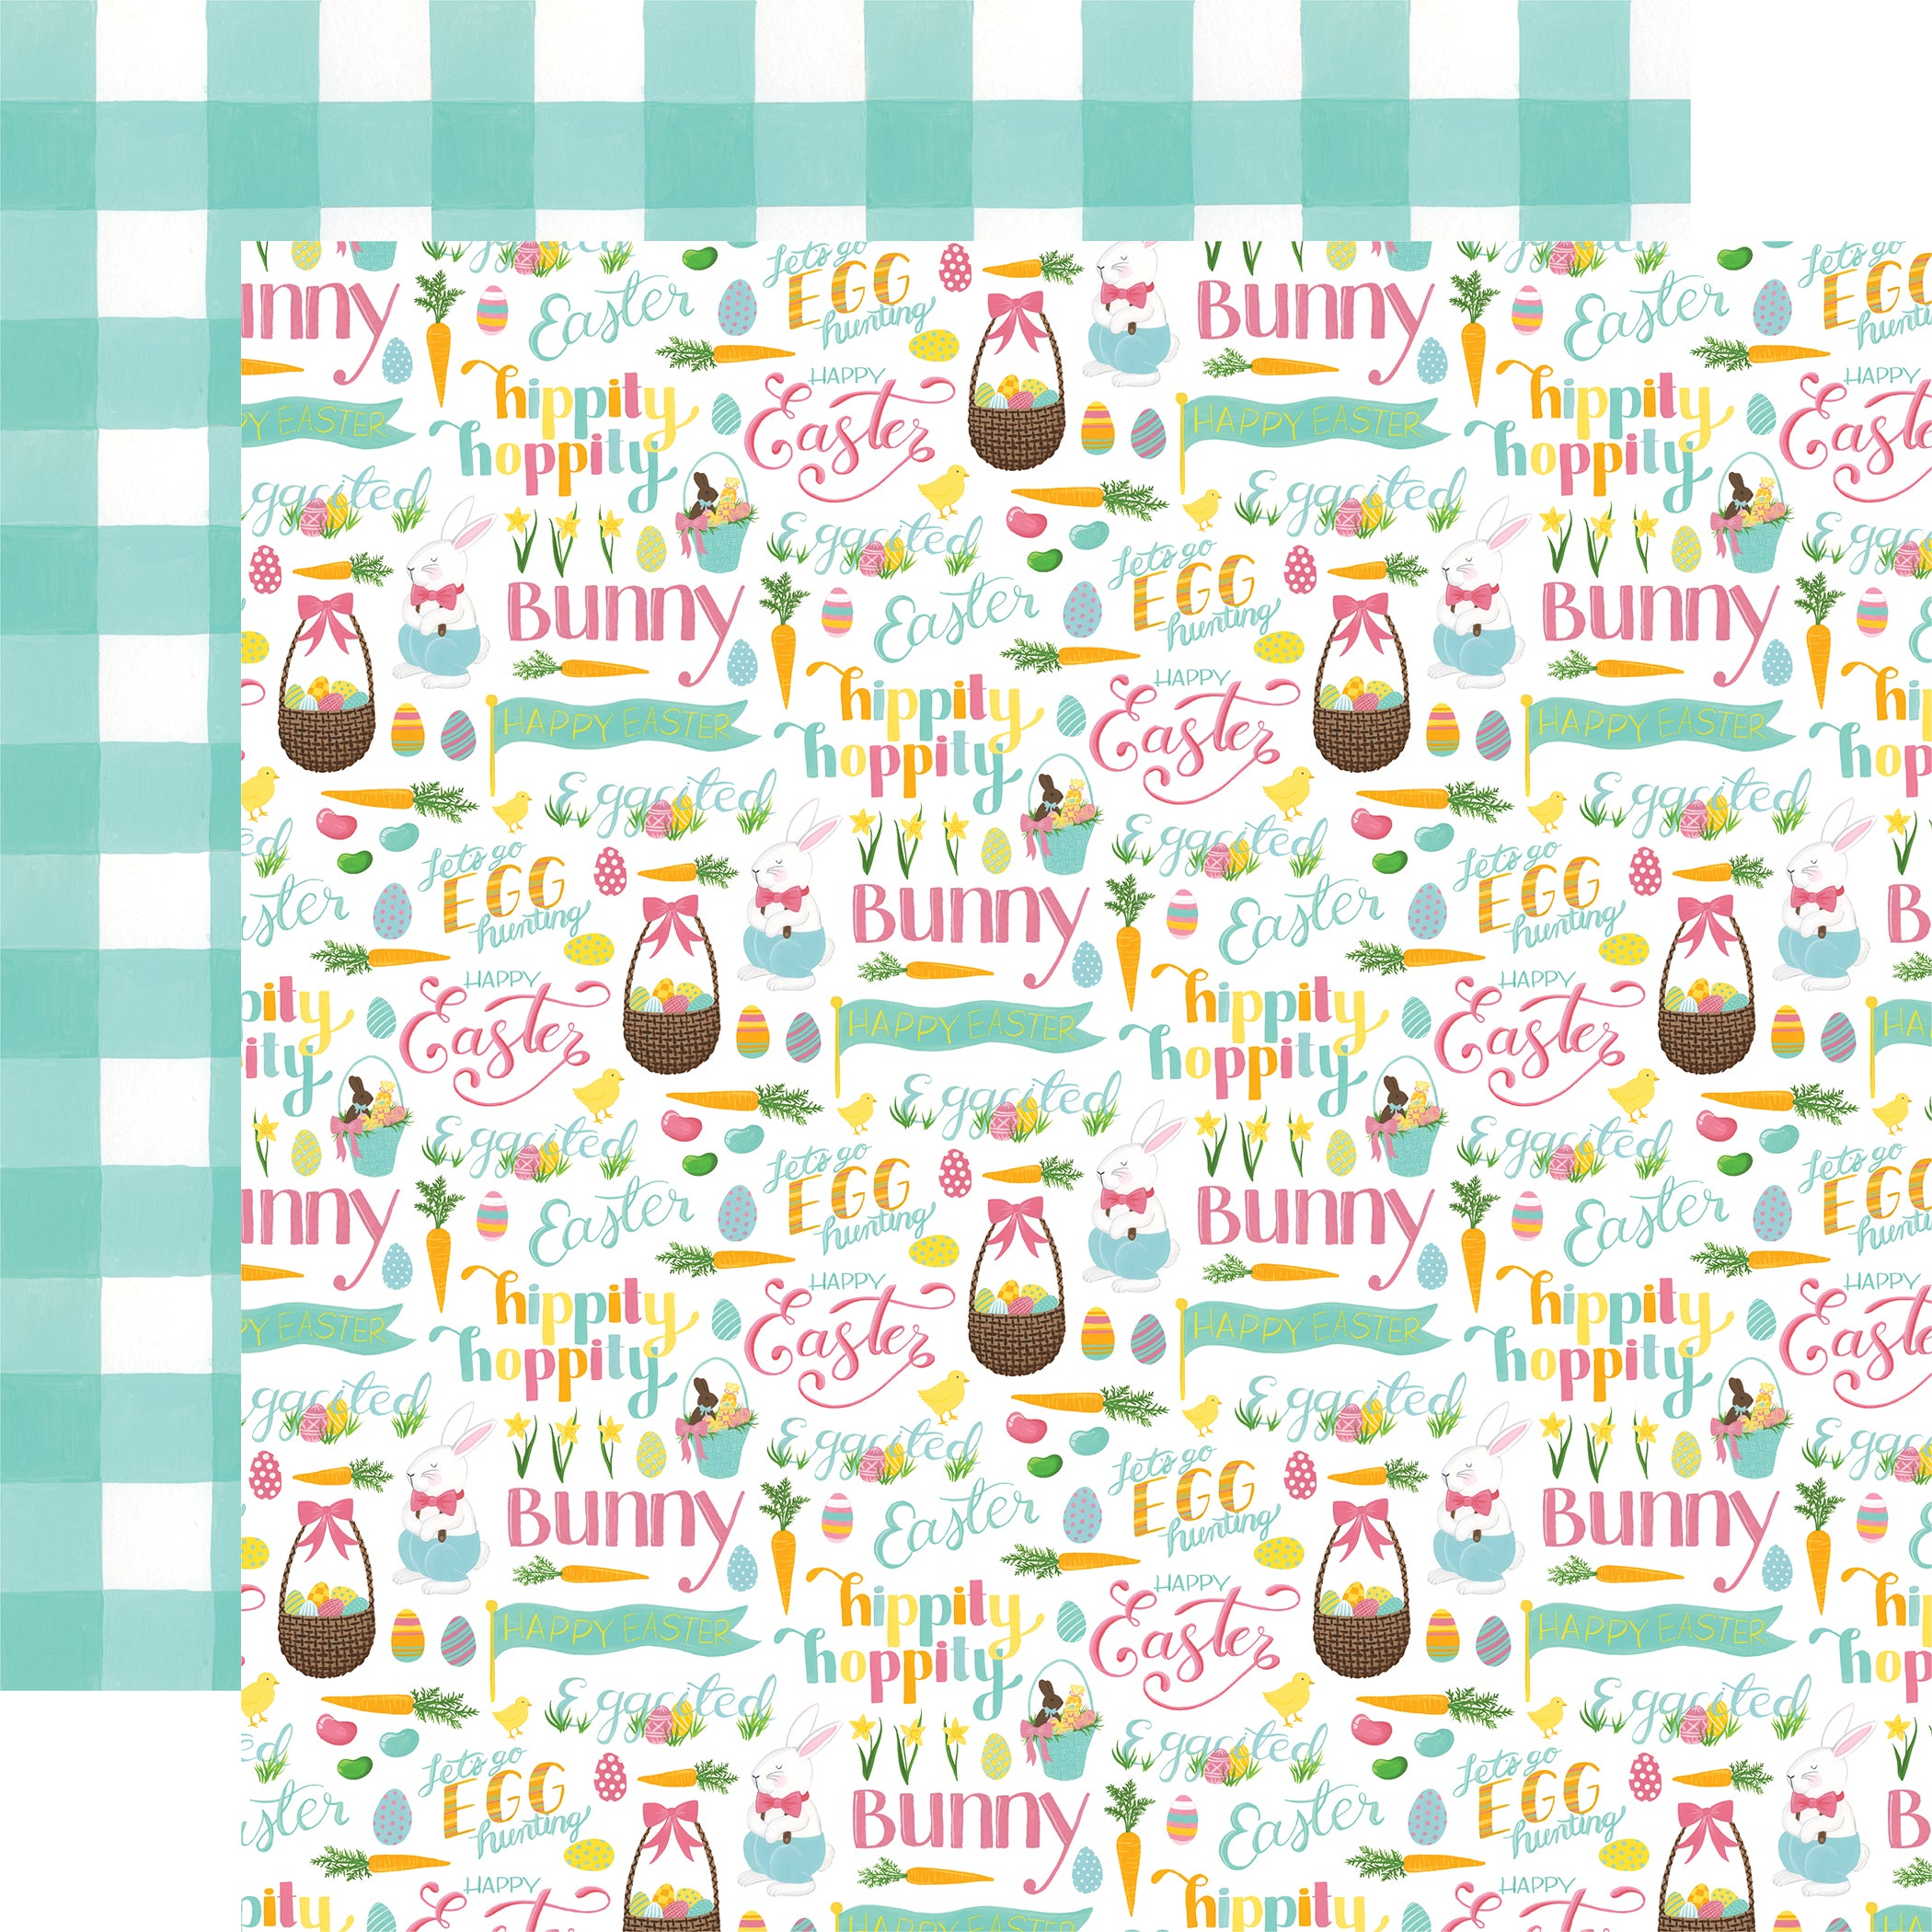 I Love Easter Collection Easter Baskets 12 x 12 Double-Sided Scrapbook Paper by Echo Park Paper